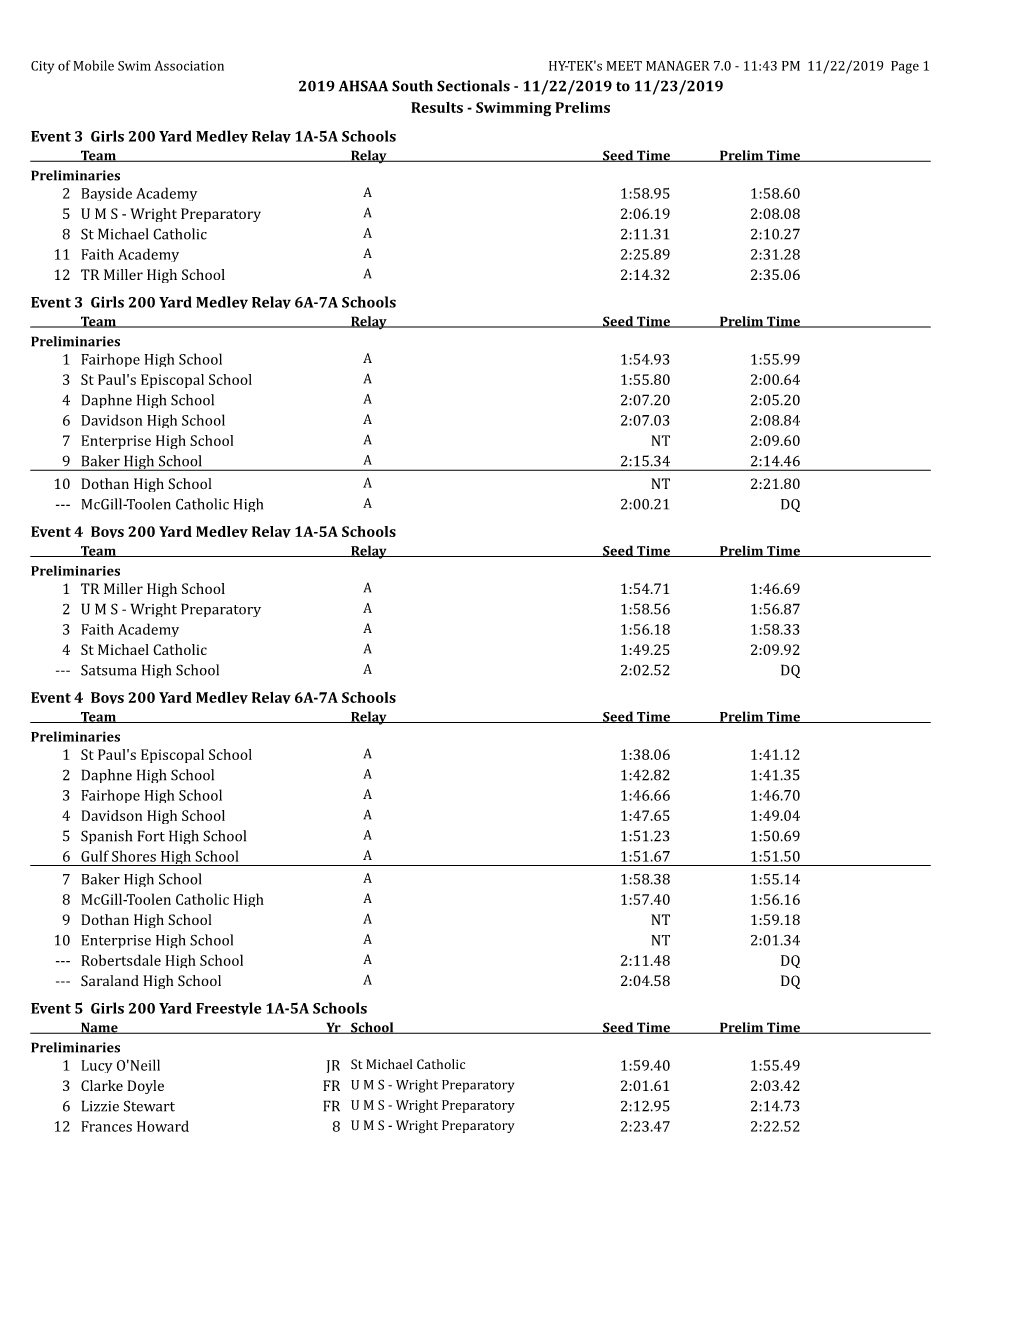 11/22/2019 to 11/23/2019 Results - Swimming Prelims